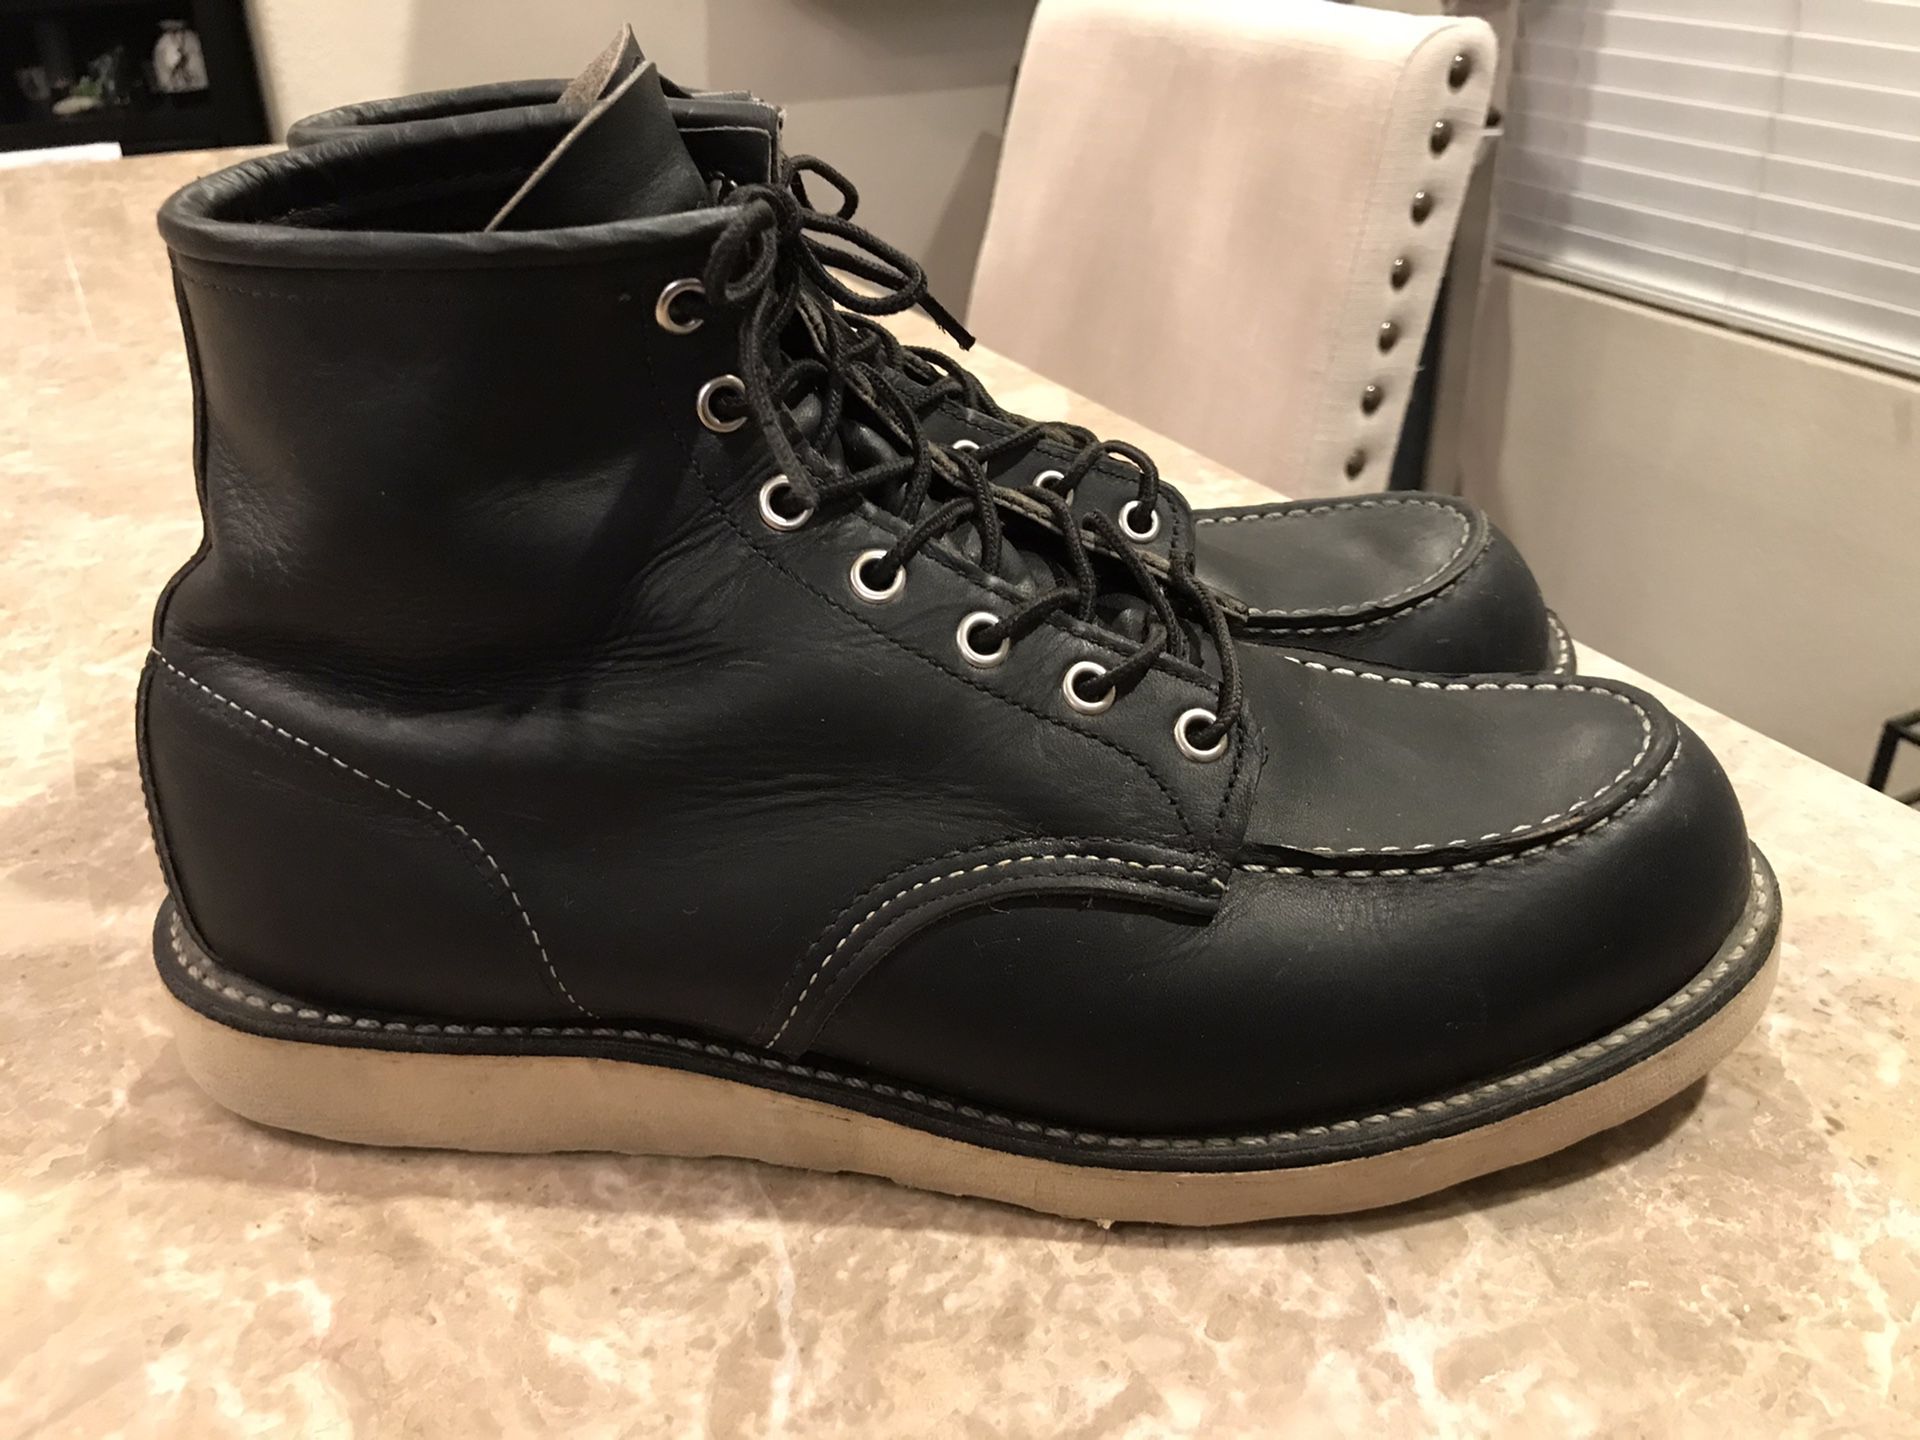 Red wing 9075 boots size 11 redwing for Sale in Fontana, CA - OfferUp